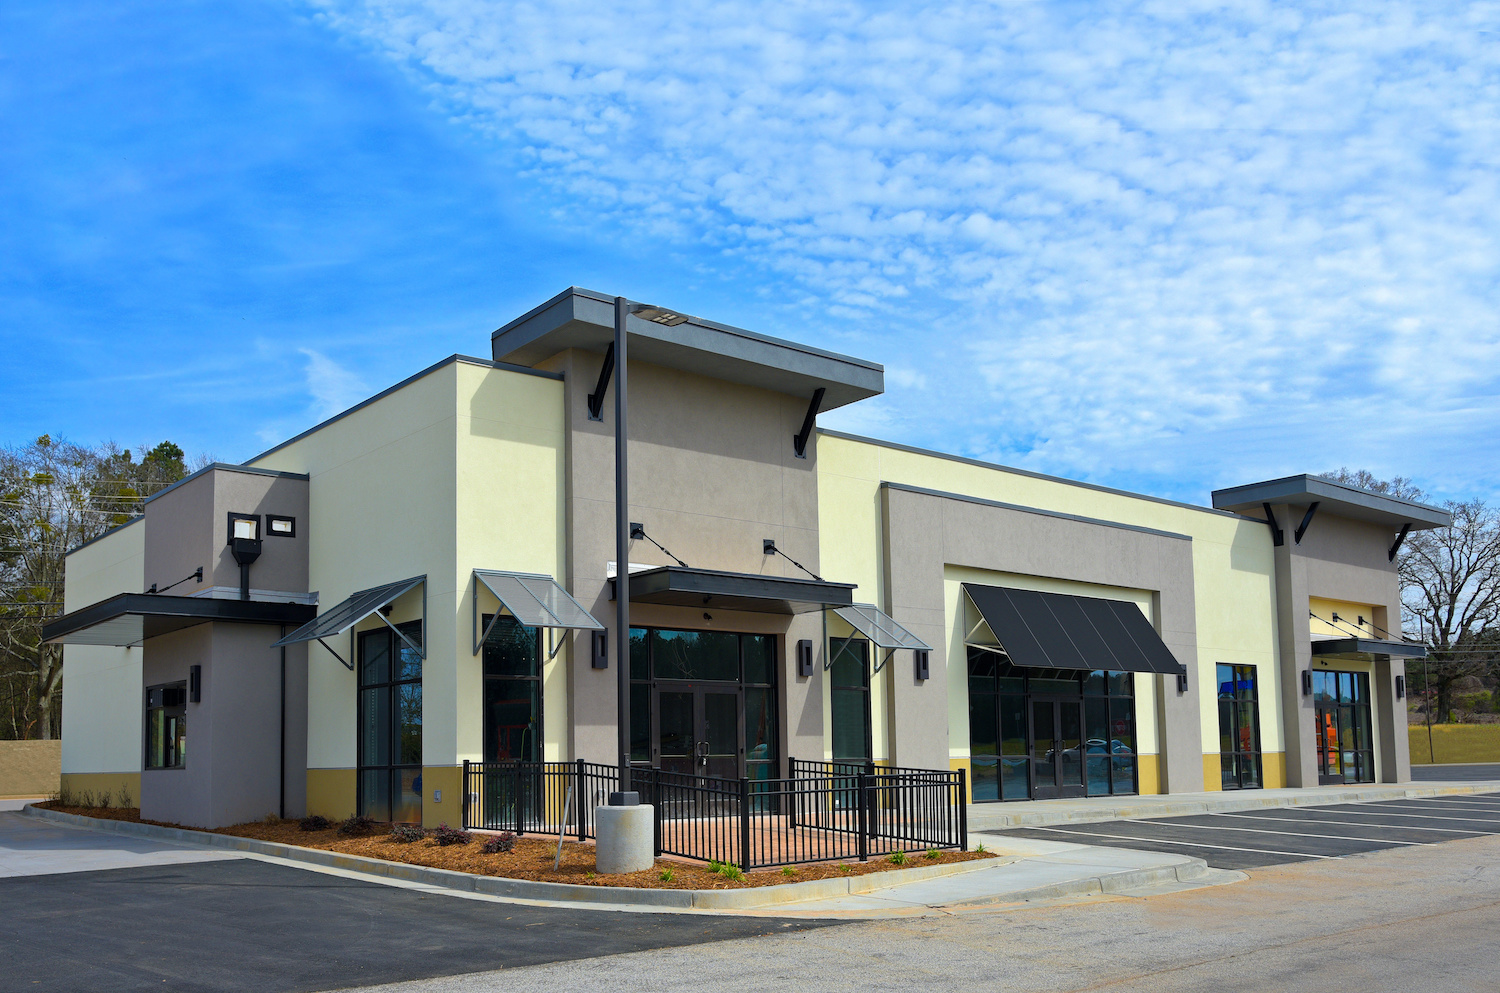 Retail Building Insurance Claims in Tampa